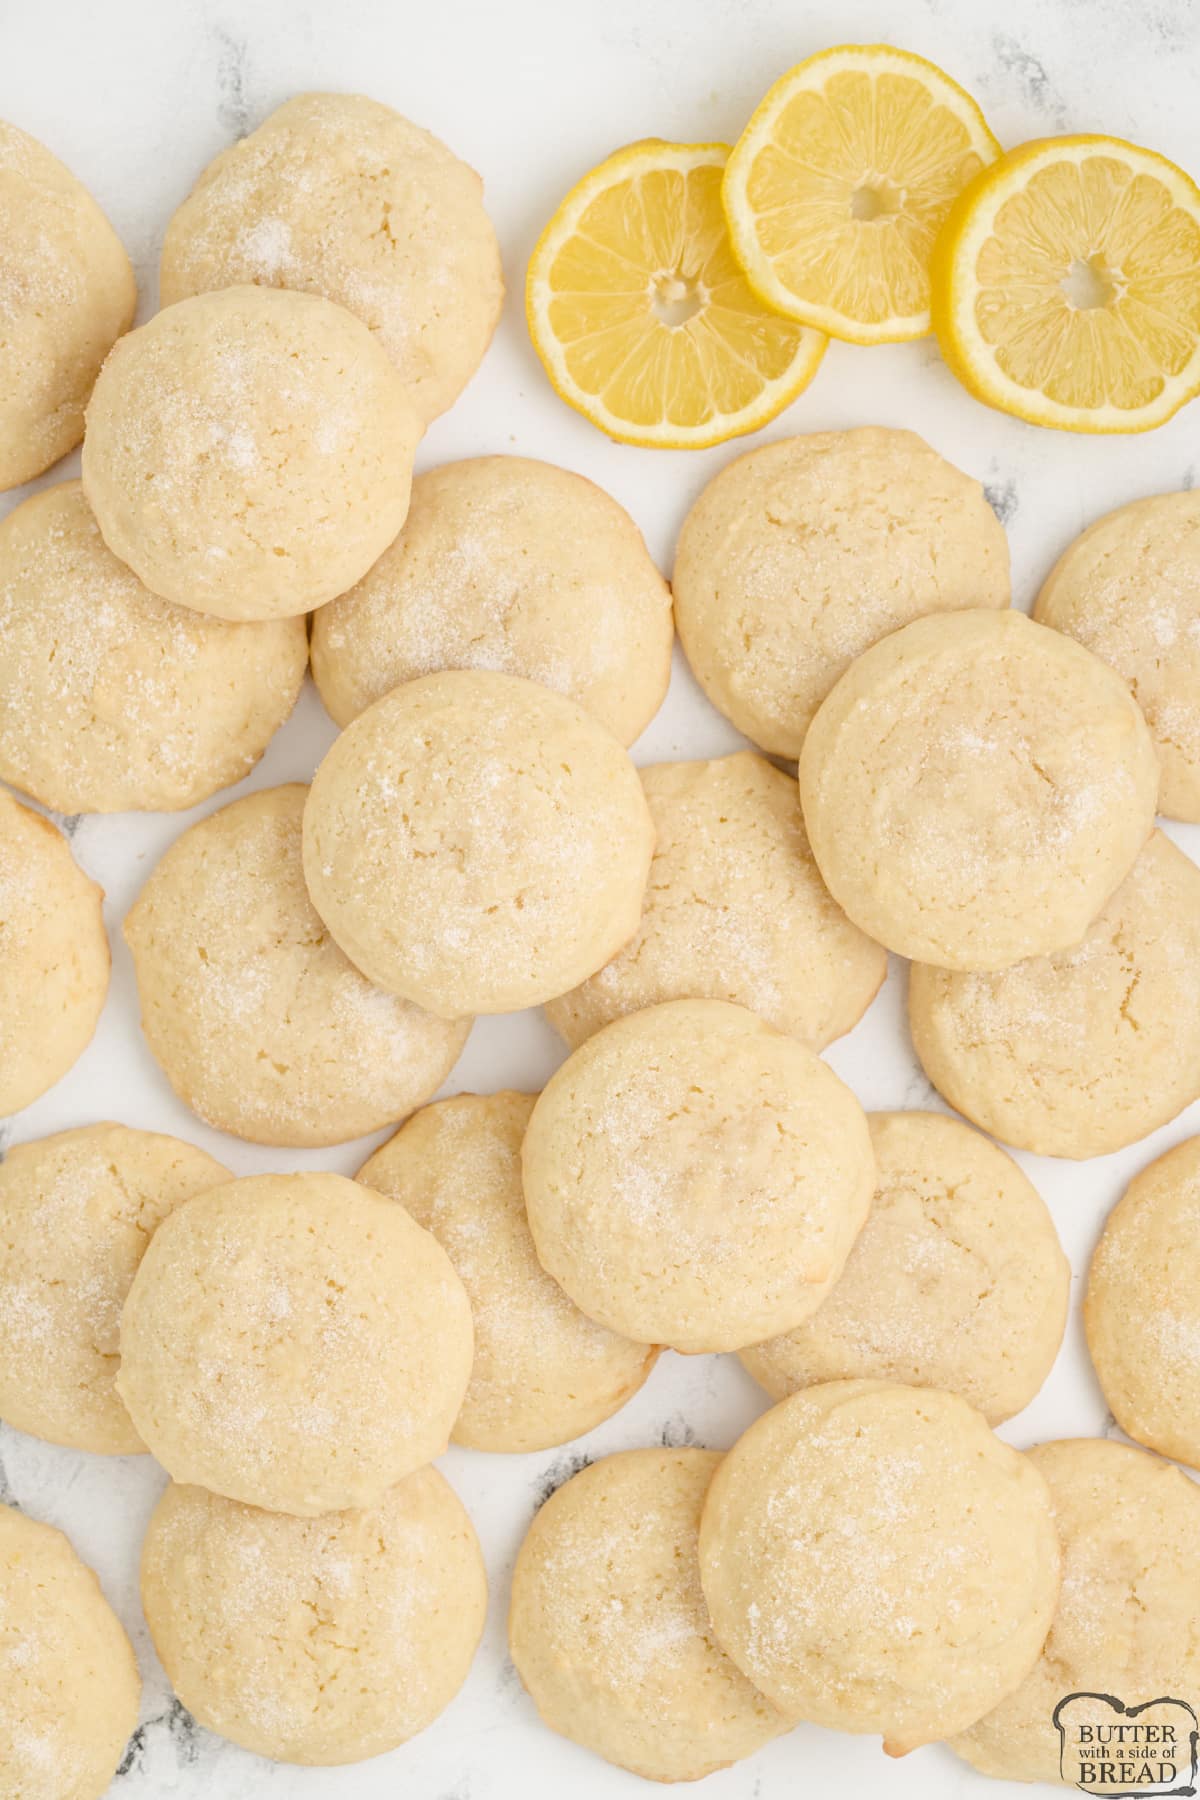 Cookies made with lemonade concentrate